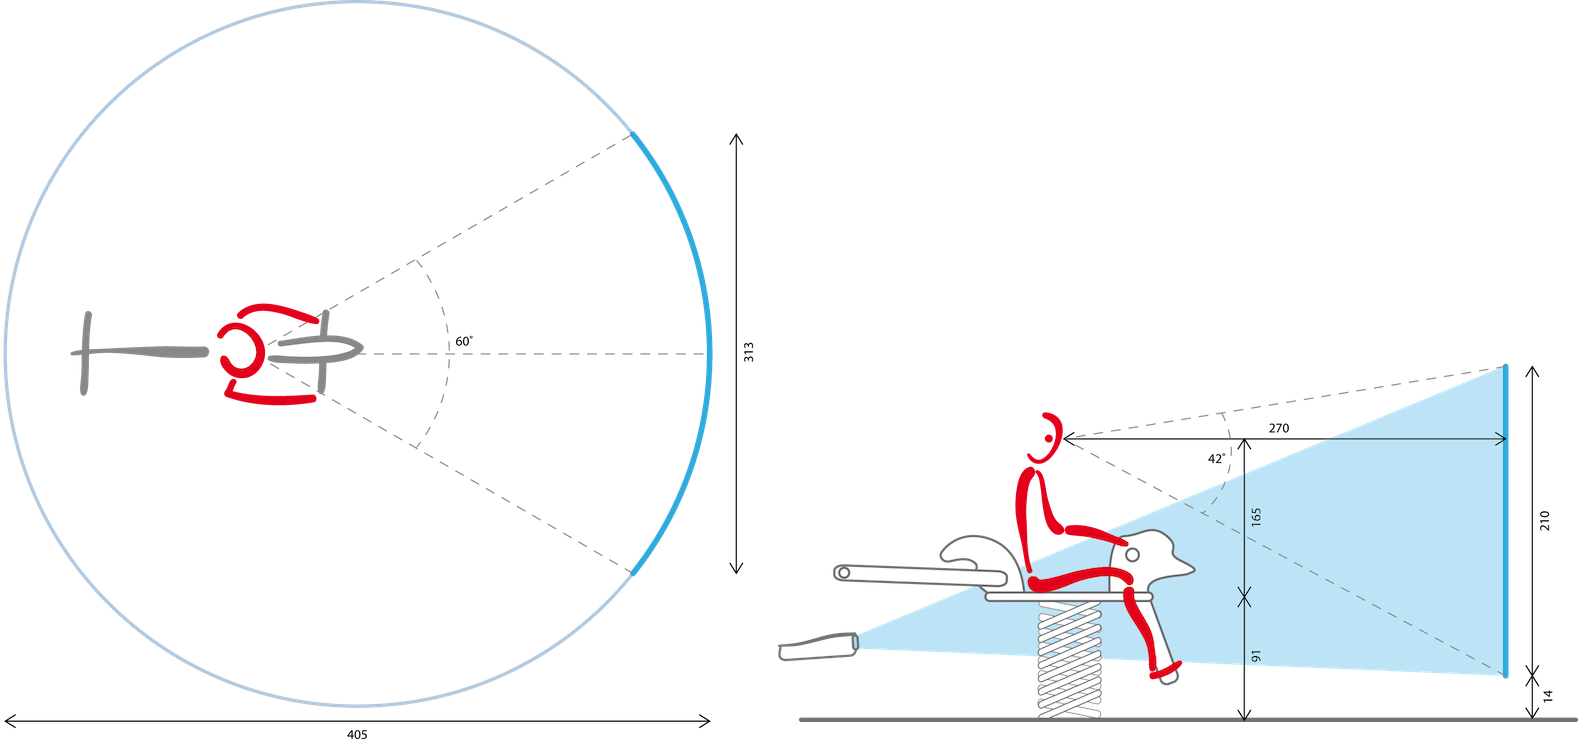 4m diameter circle with seesaw positioned in the middle, with a projection of 3x2 meters